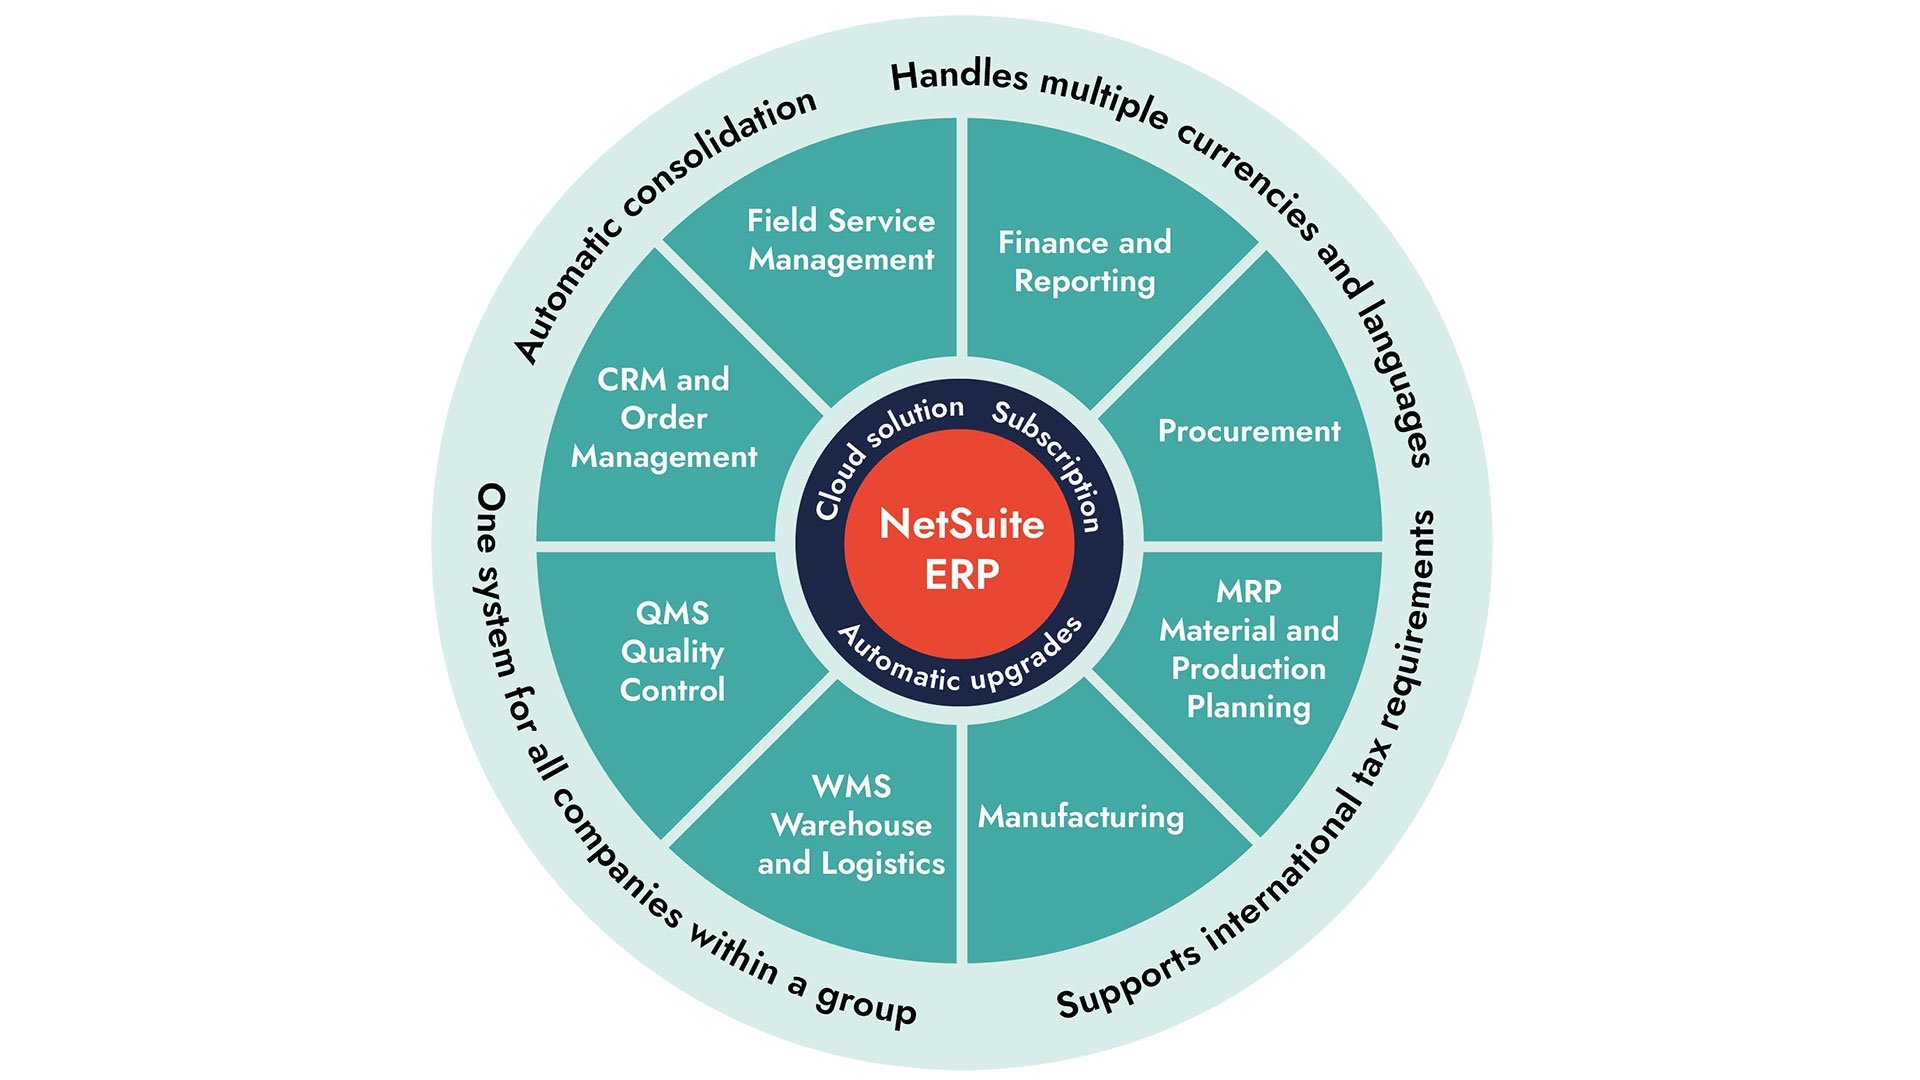 netsuite-modules-16x9NetSuite offers a suite of modules that cover everything from financial management to sales and customer relationship management (CRM), inventory and order management, manufacturing, logistics, procurement, HR, and project management.